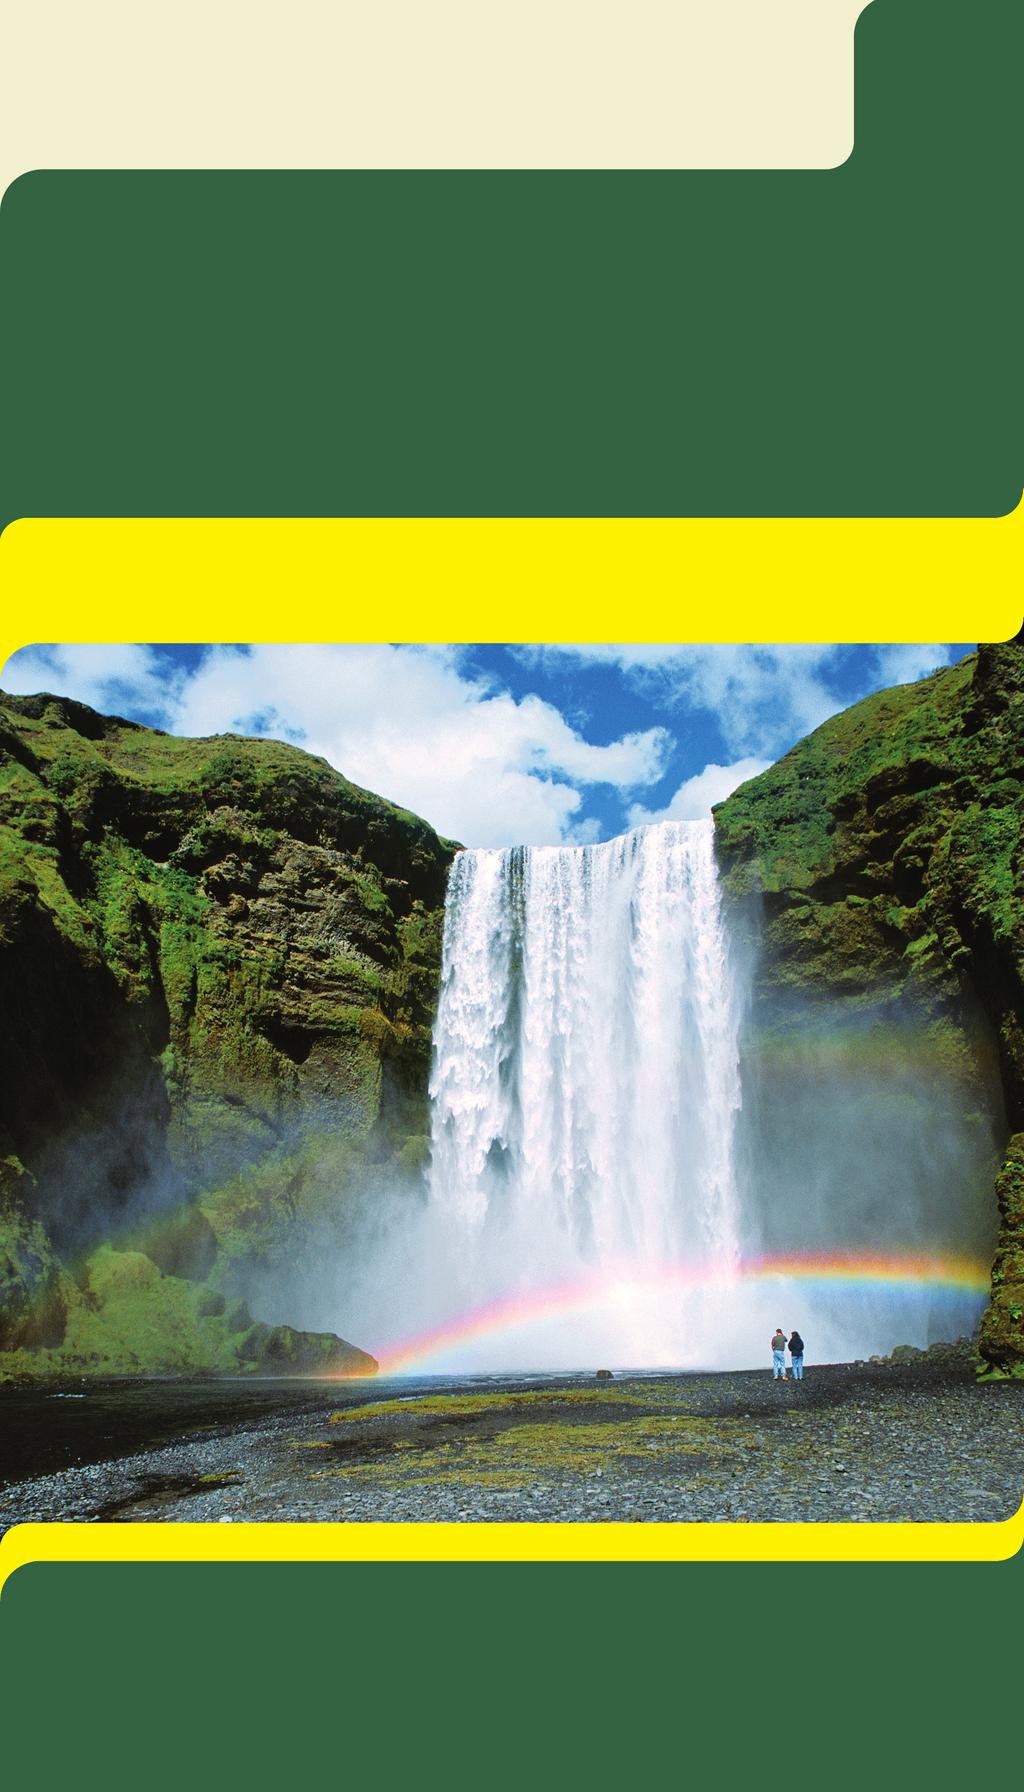 EXPLORING ICELAND June 29-July 9, 2017 11 days for $5,642 total price from Los Angeles ($5,295 air & land inclusive plus $347 airline taxes and fees) A Special